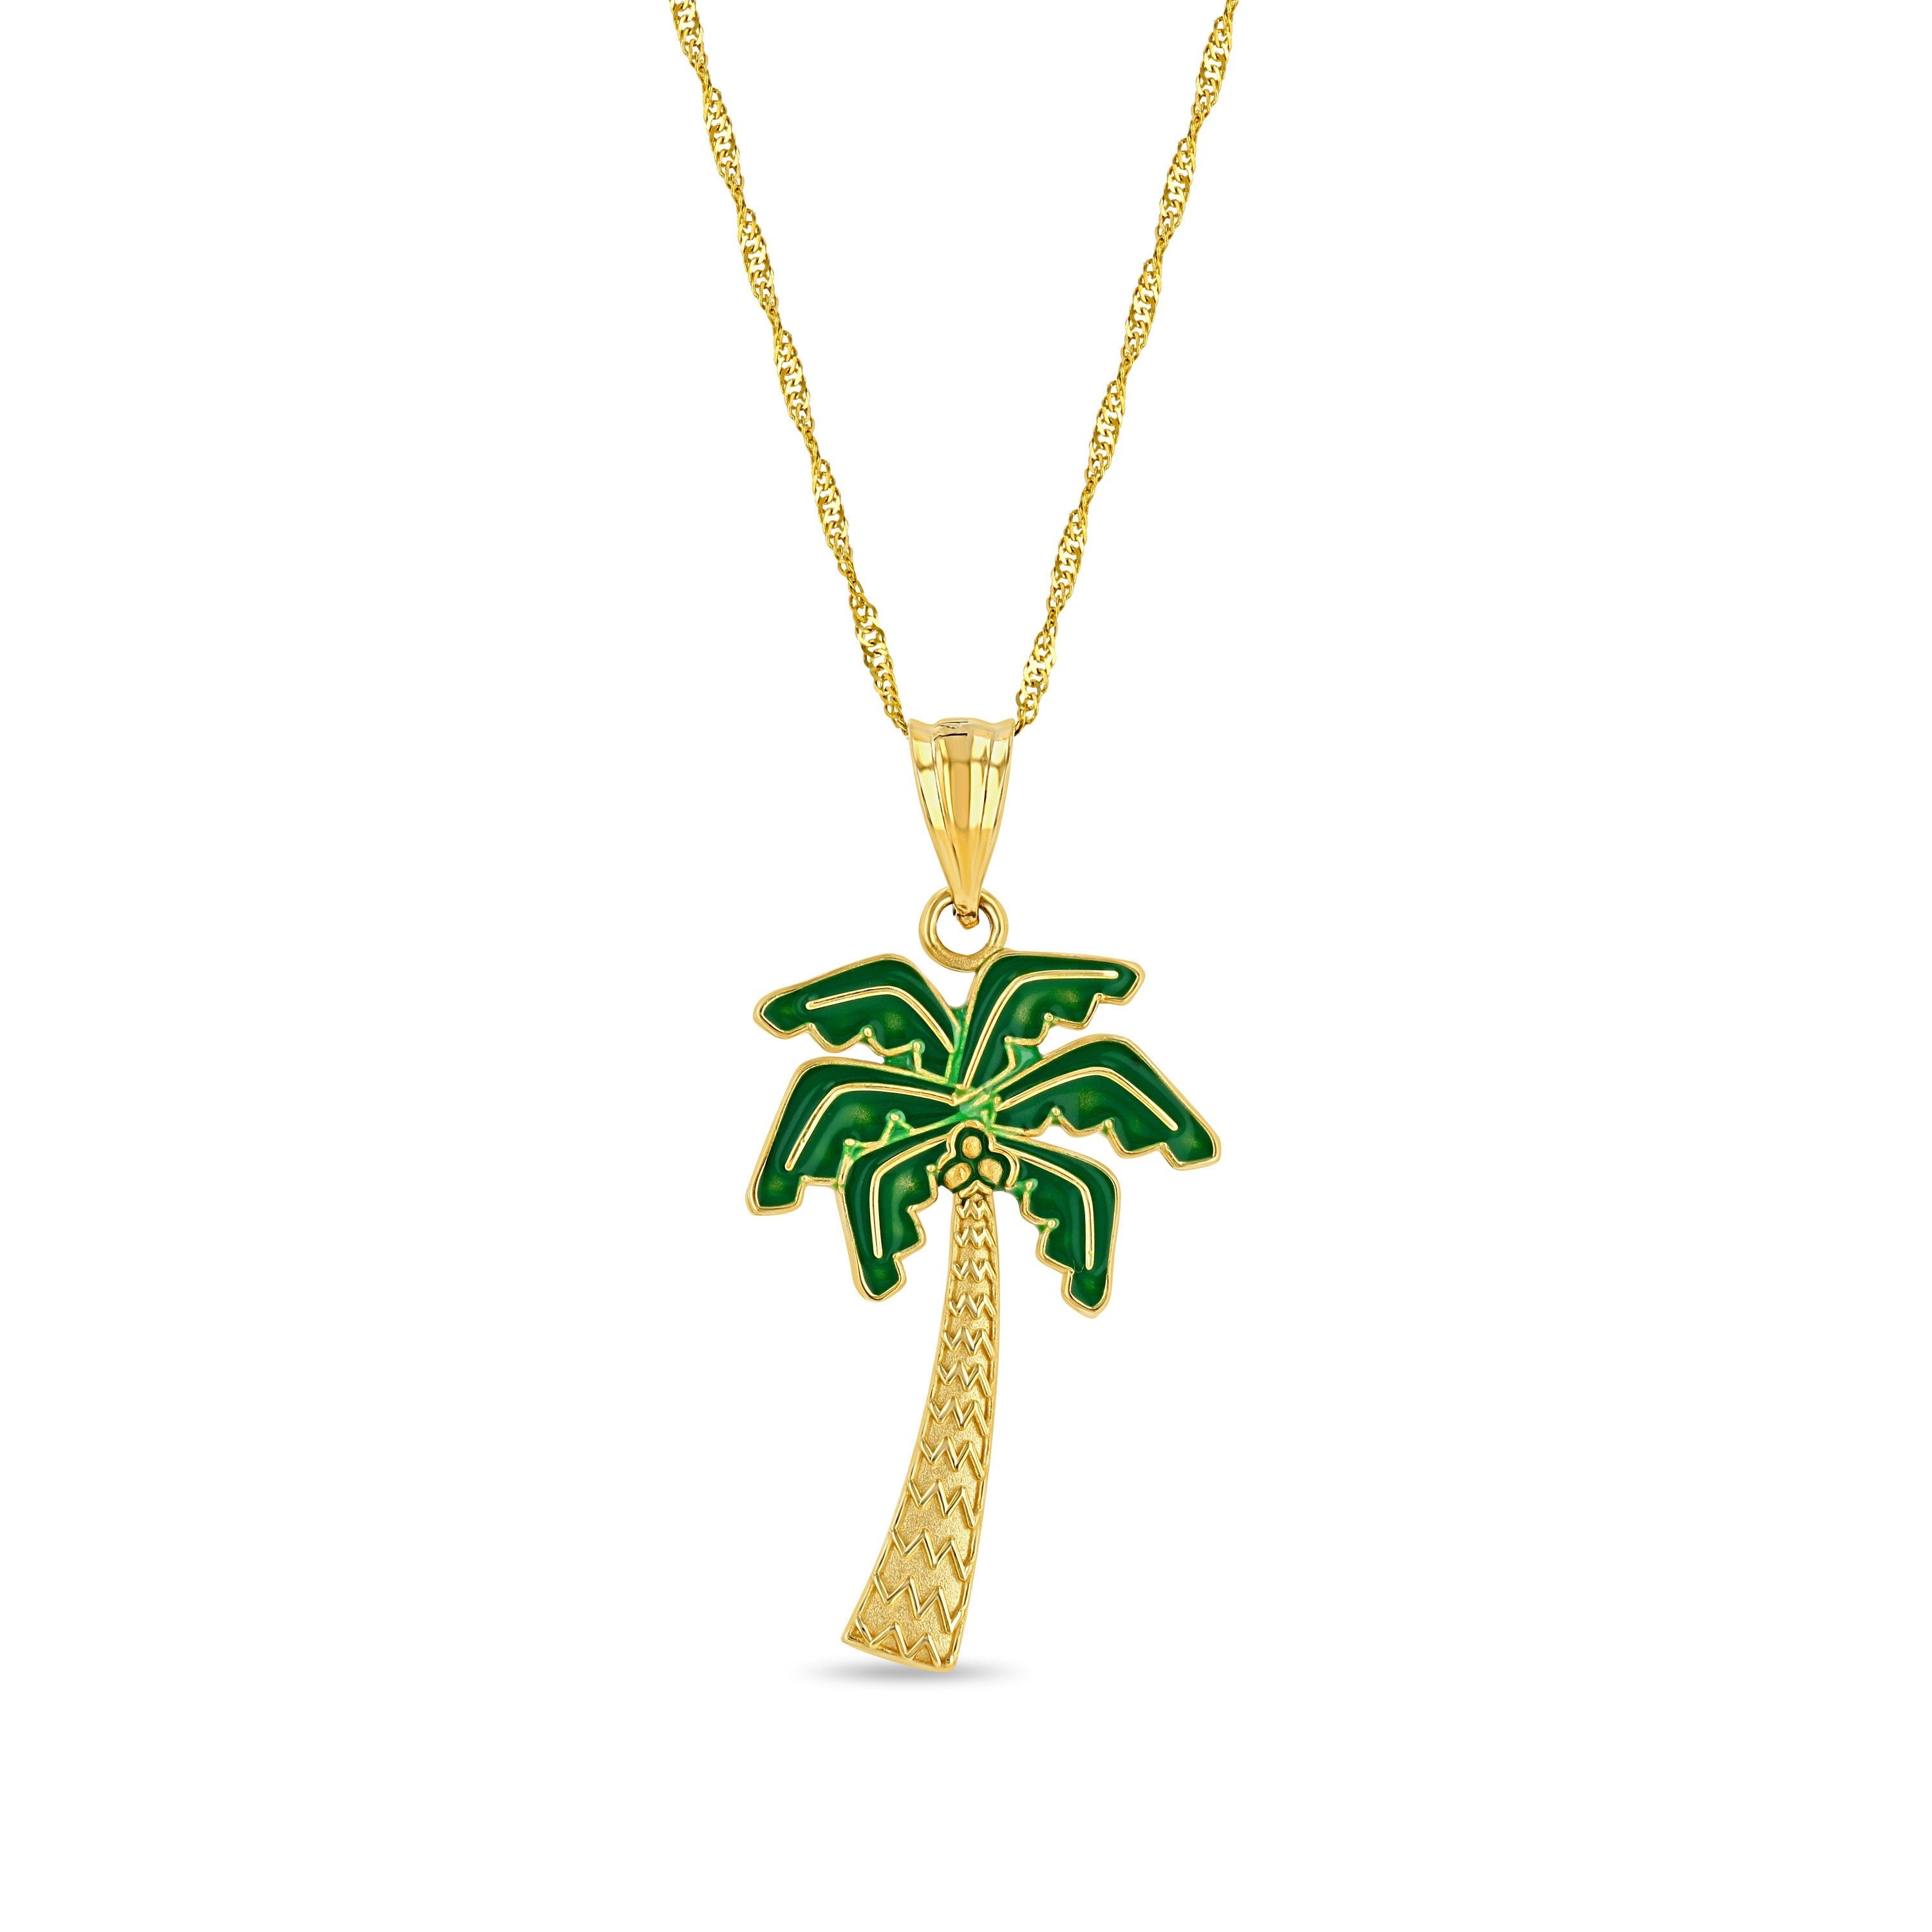 14k solid gold Palm tree pendant with green enamel on 18" solid gold chain